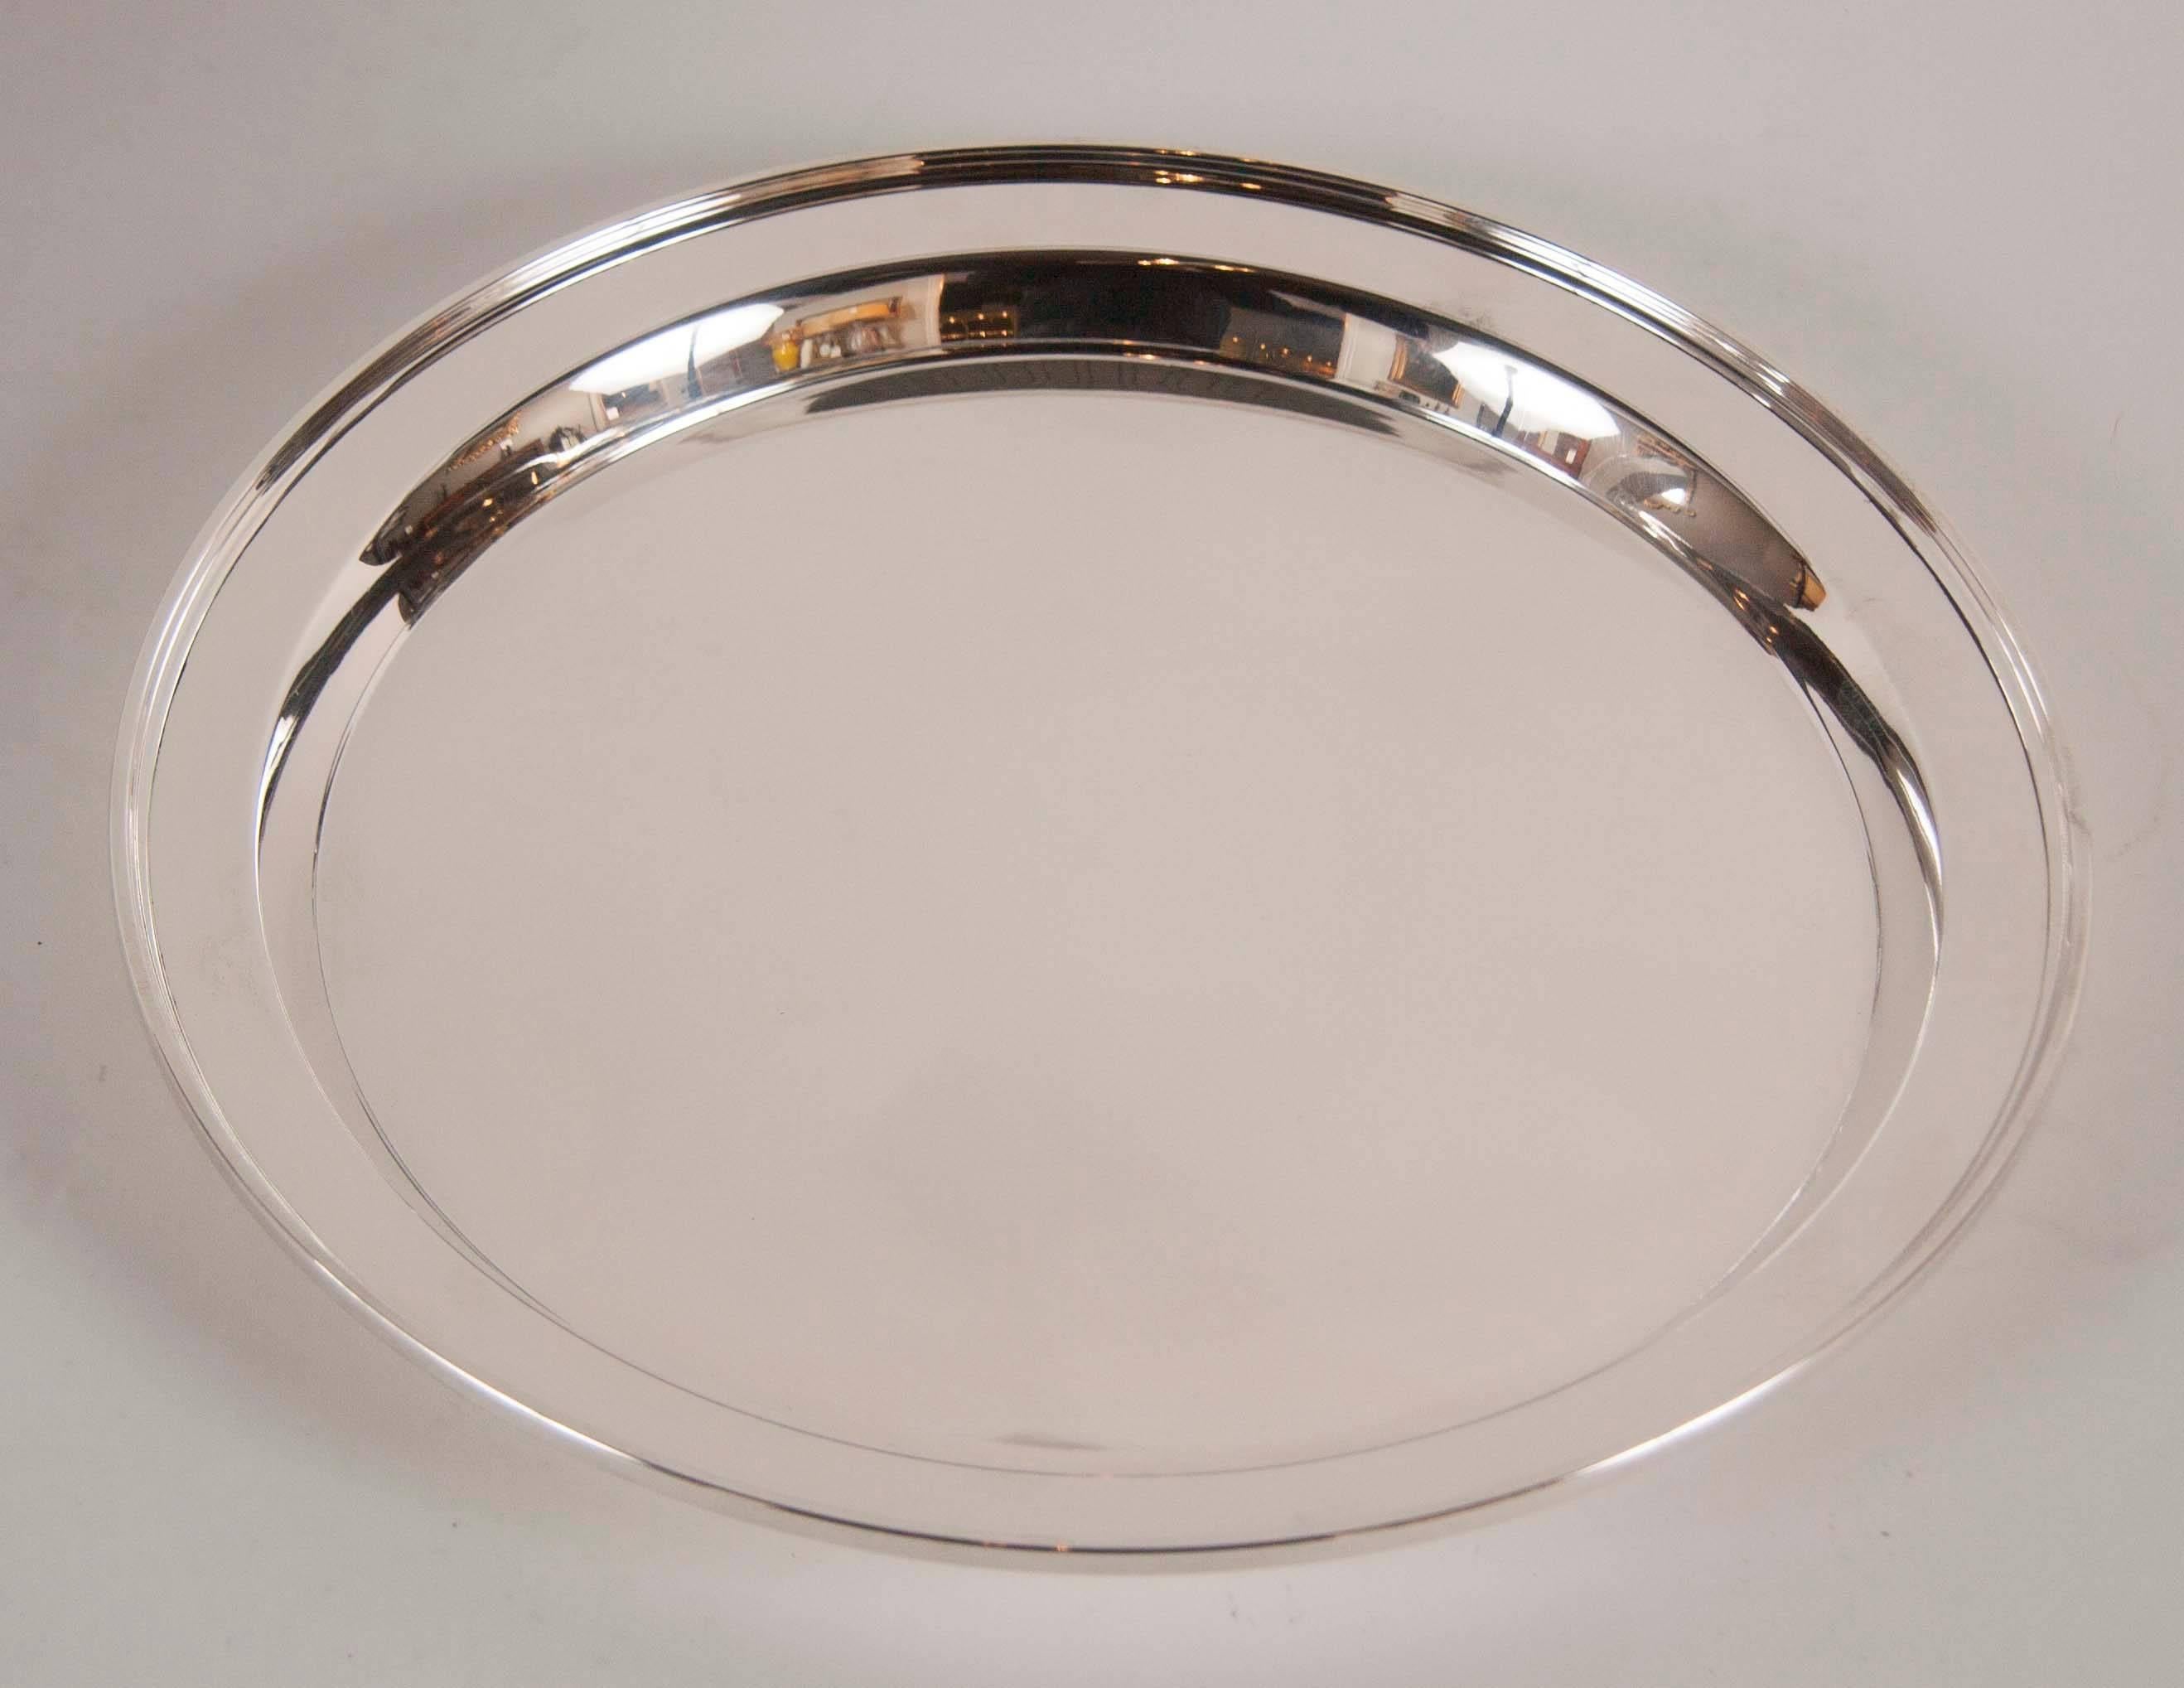 An exceptional pair of Cartier sterling silver deep trimmed serving trays. Marked on bottom.